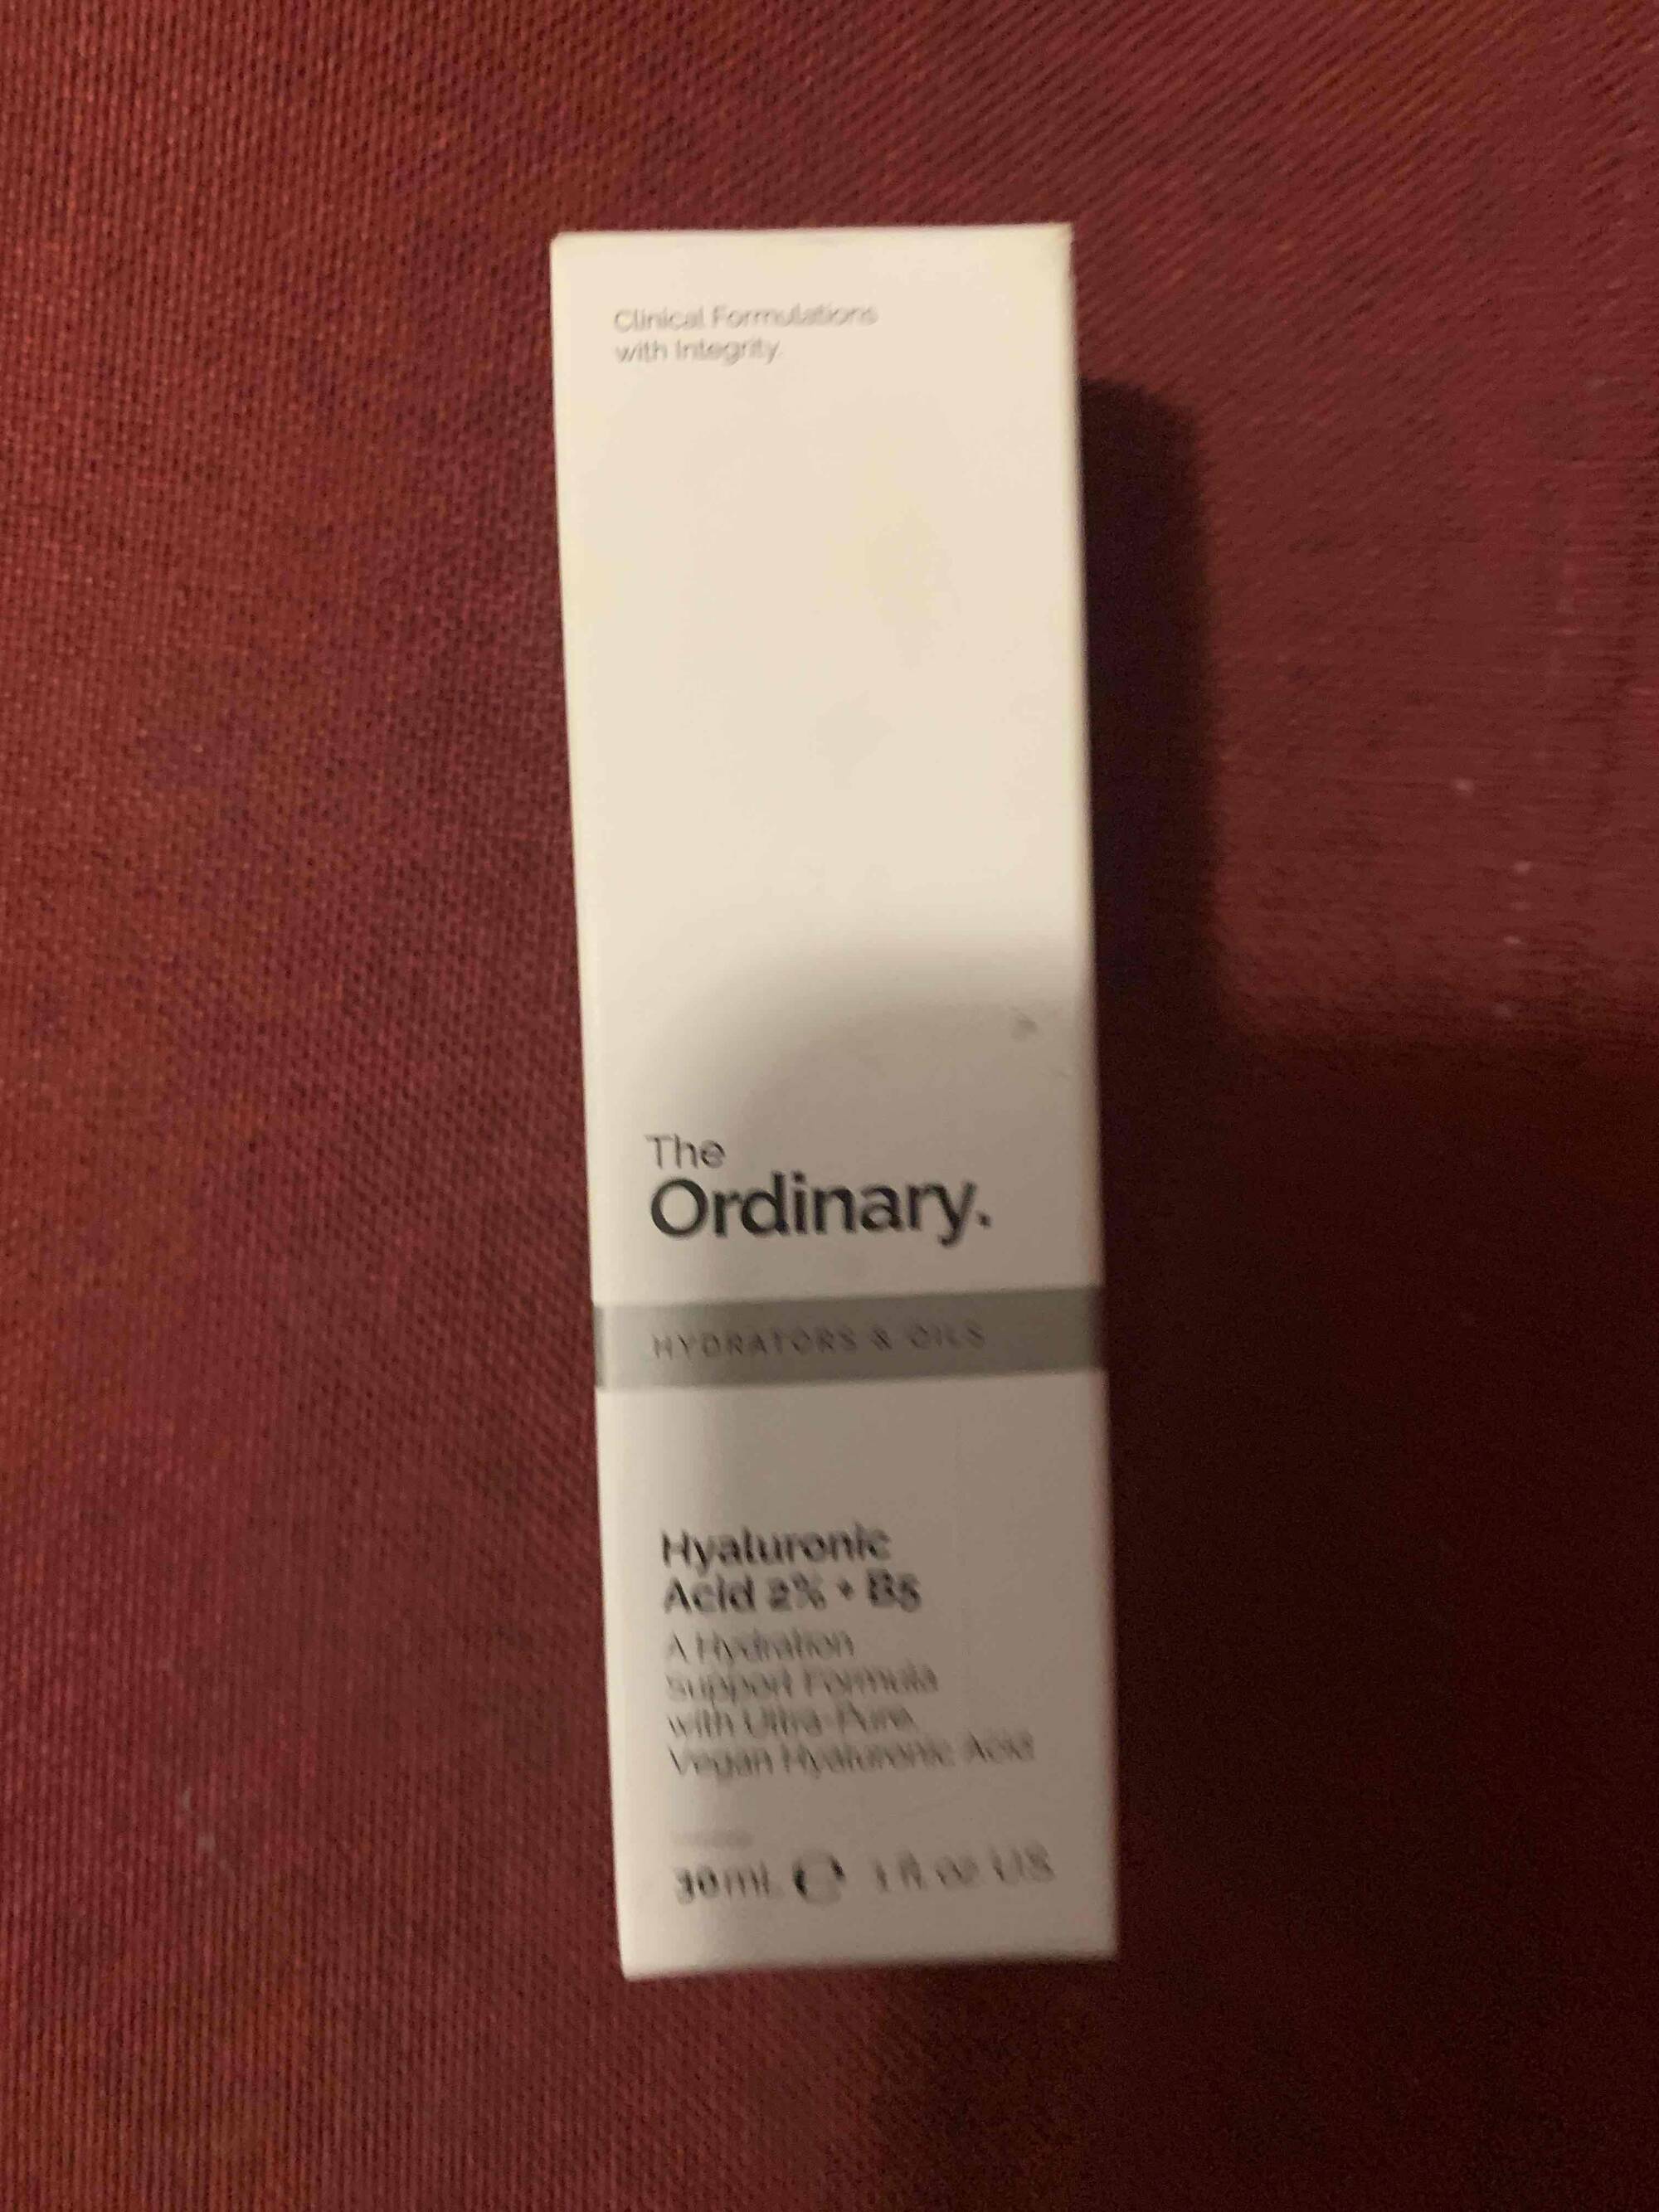 THE ORDINARY - Hydrators and oils Hyaluronic acid